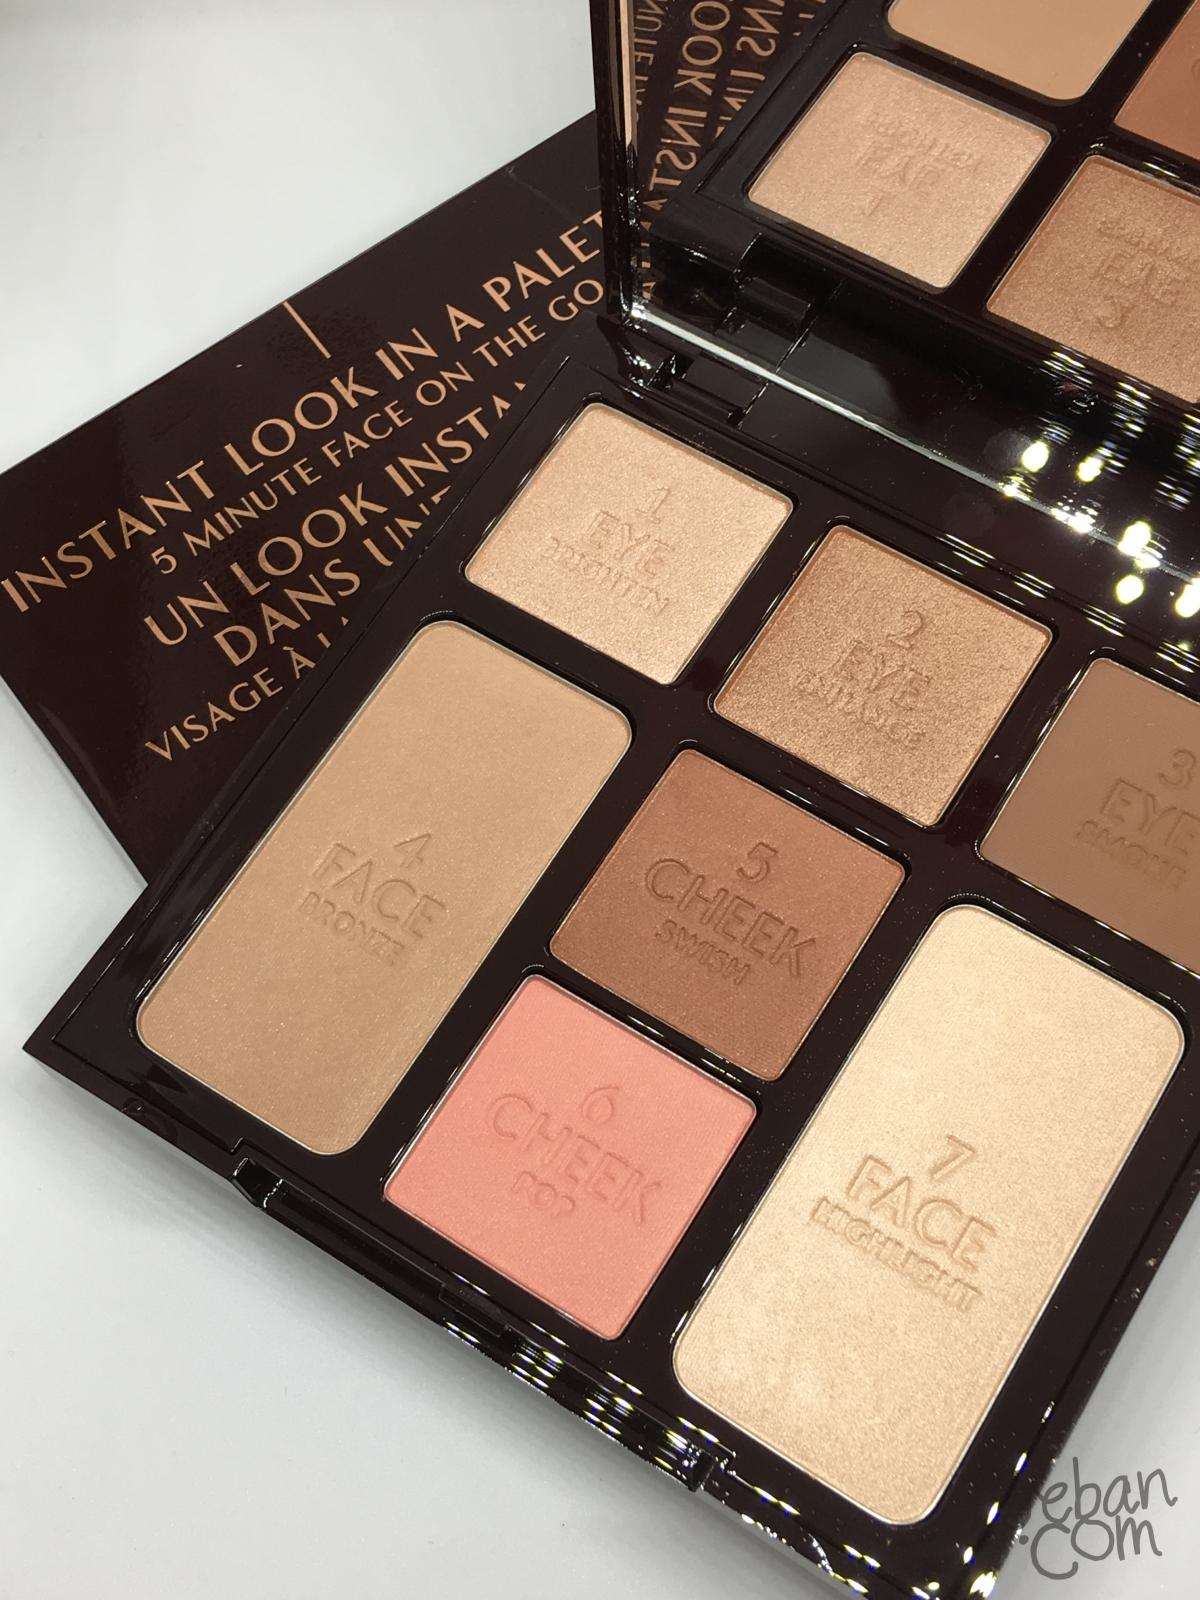 Charlotte Tilbury Instant look in a palette in Beauty Glow (Limited Edition)